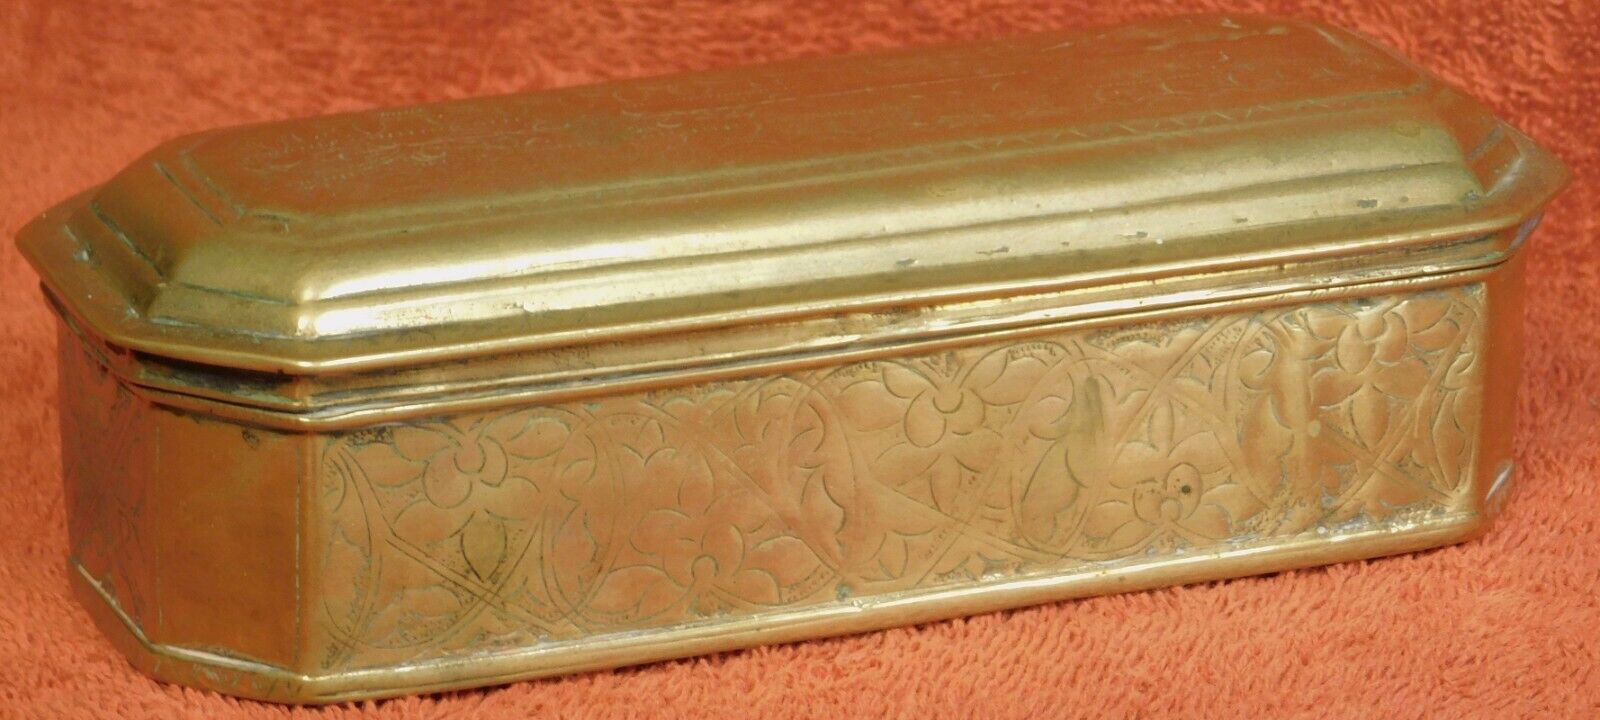 Antique Dutch Brass Pipe Tobacco Box GOTHIC Engraved 1700s 18th Century EARLY